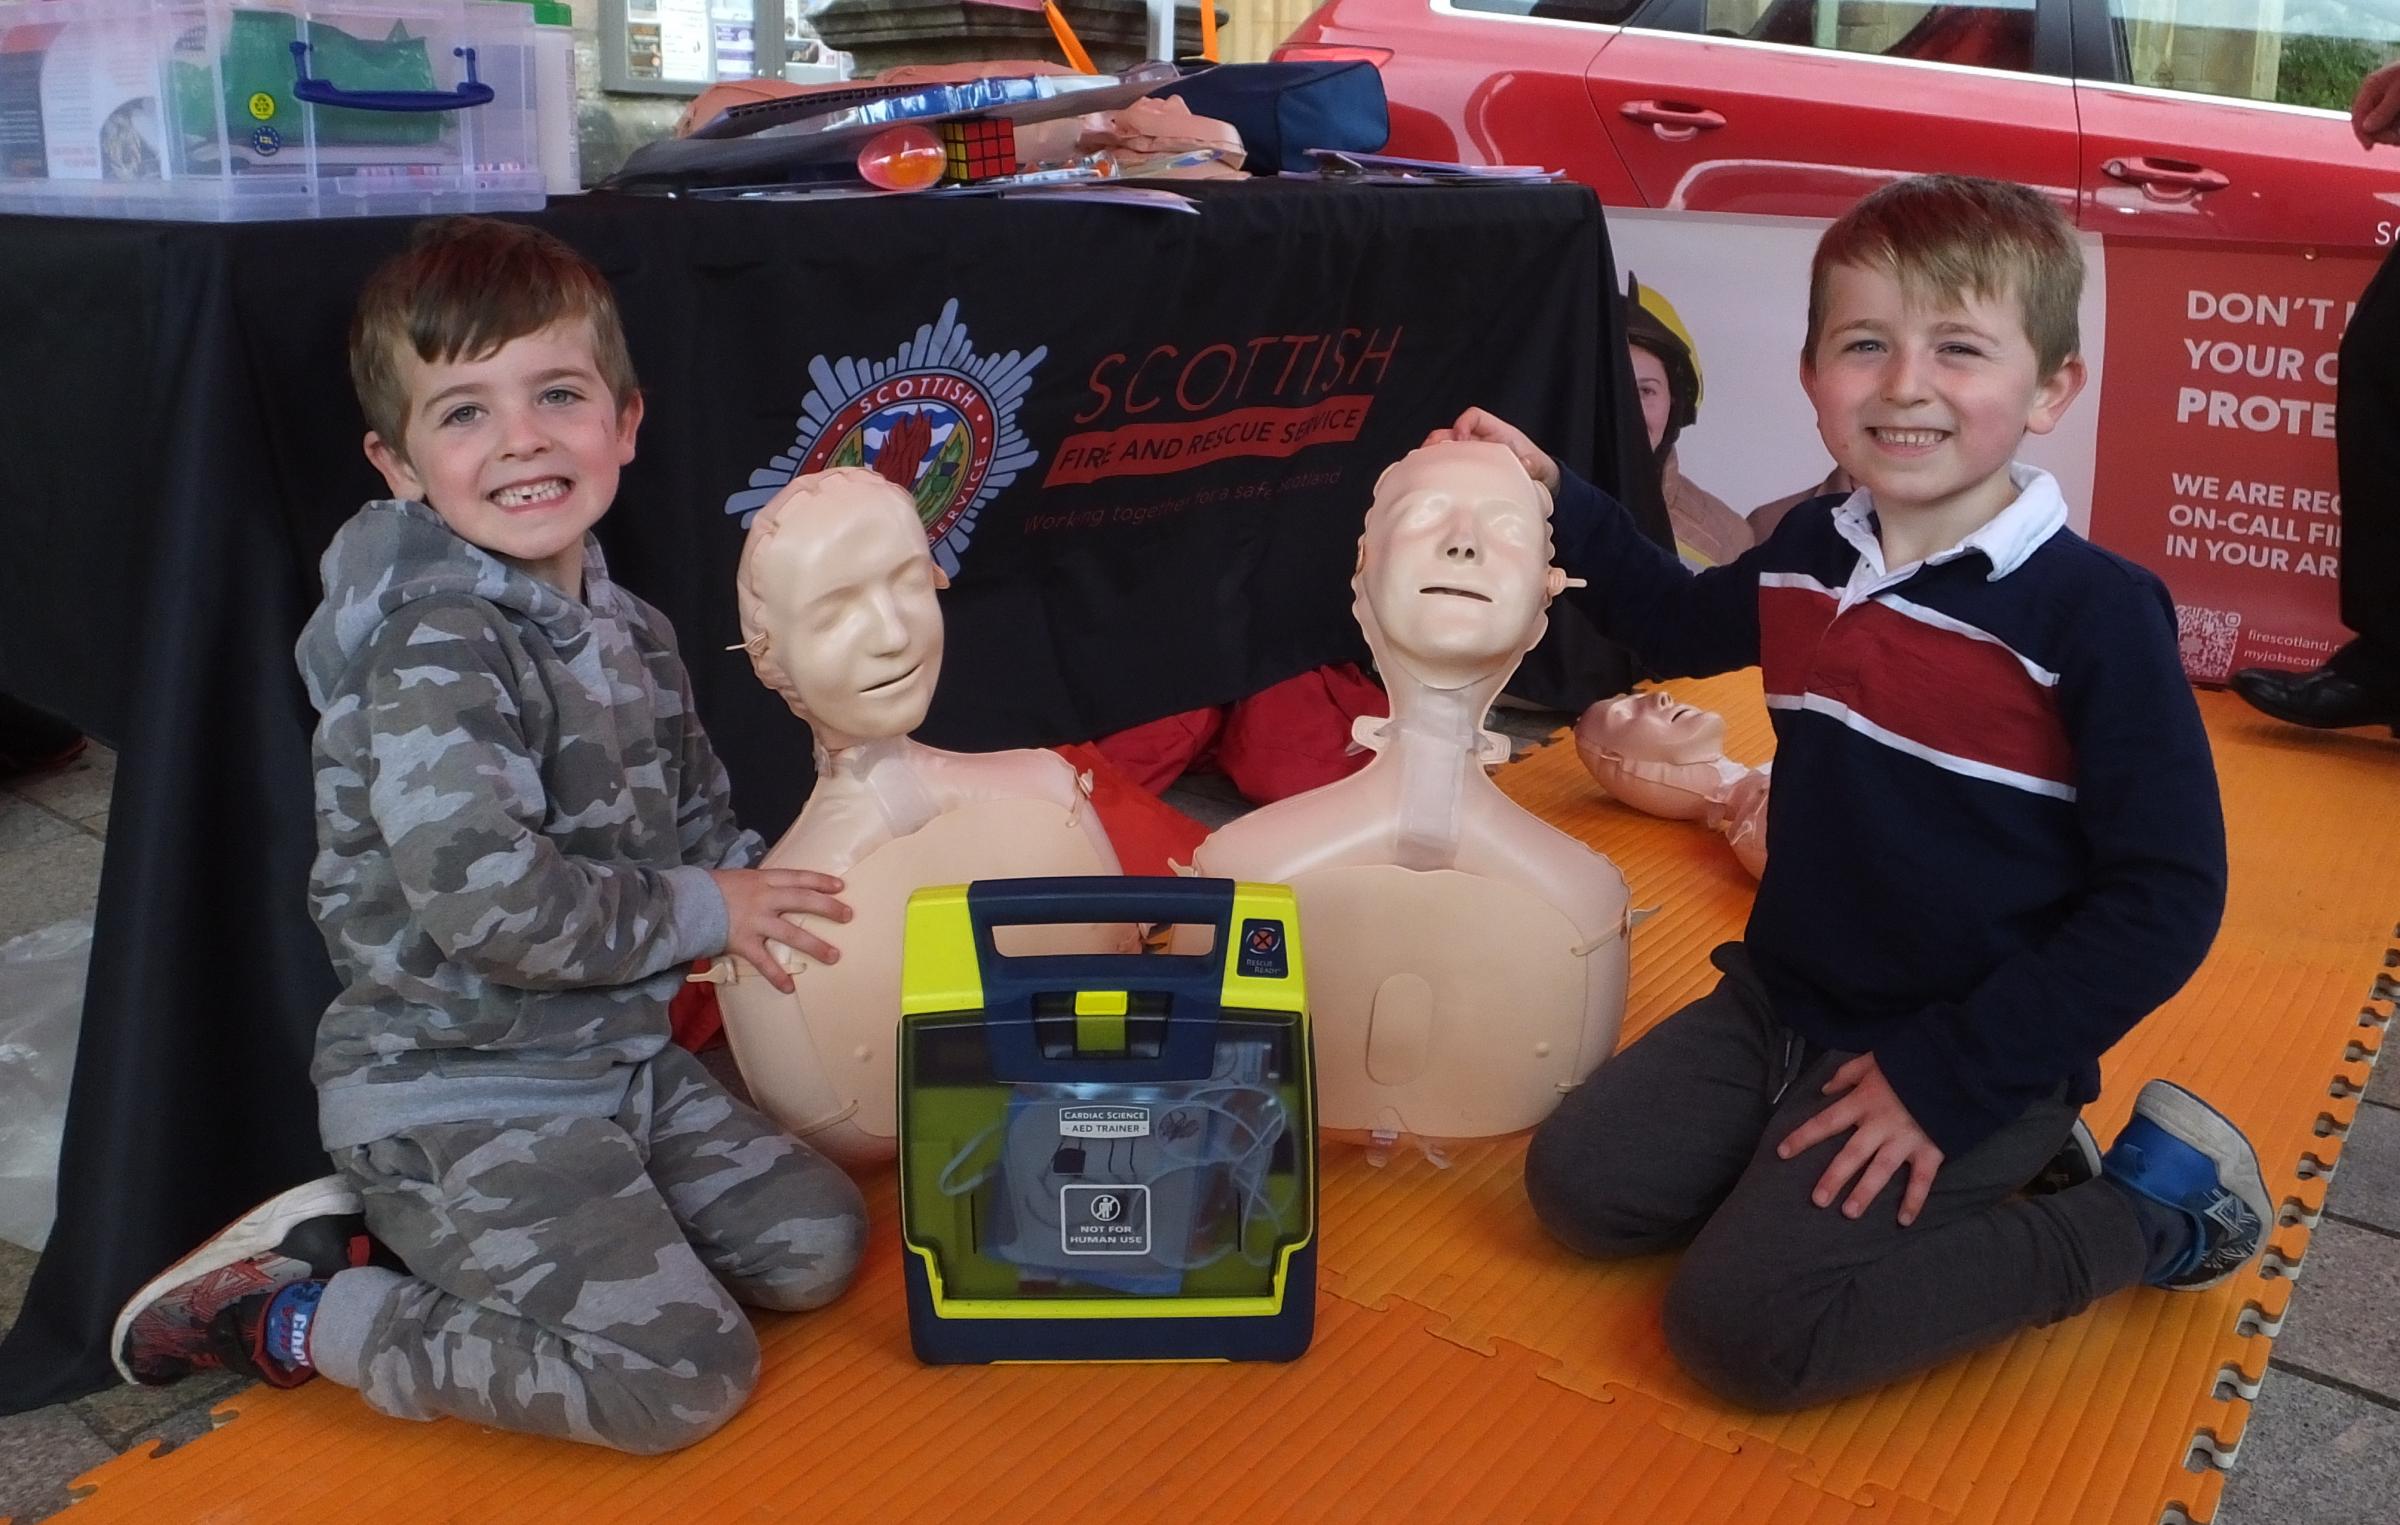 Rory and Alfie Cowan learn about life-saving techniques at the SFRS stall